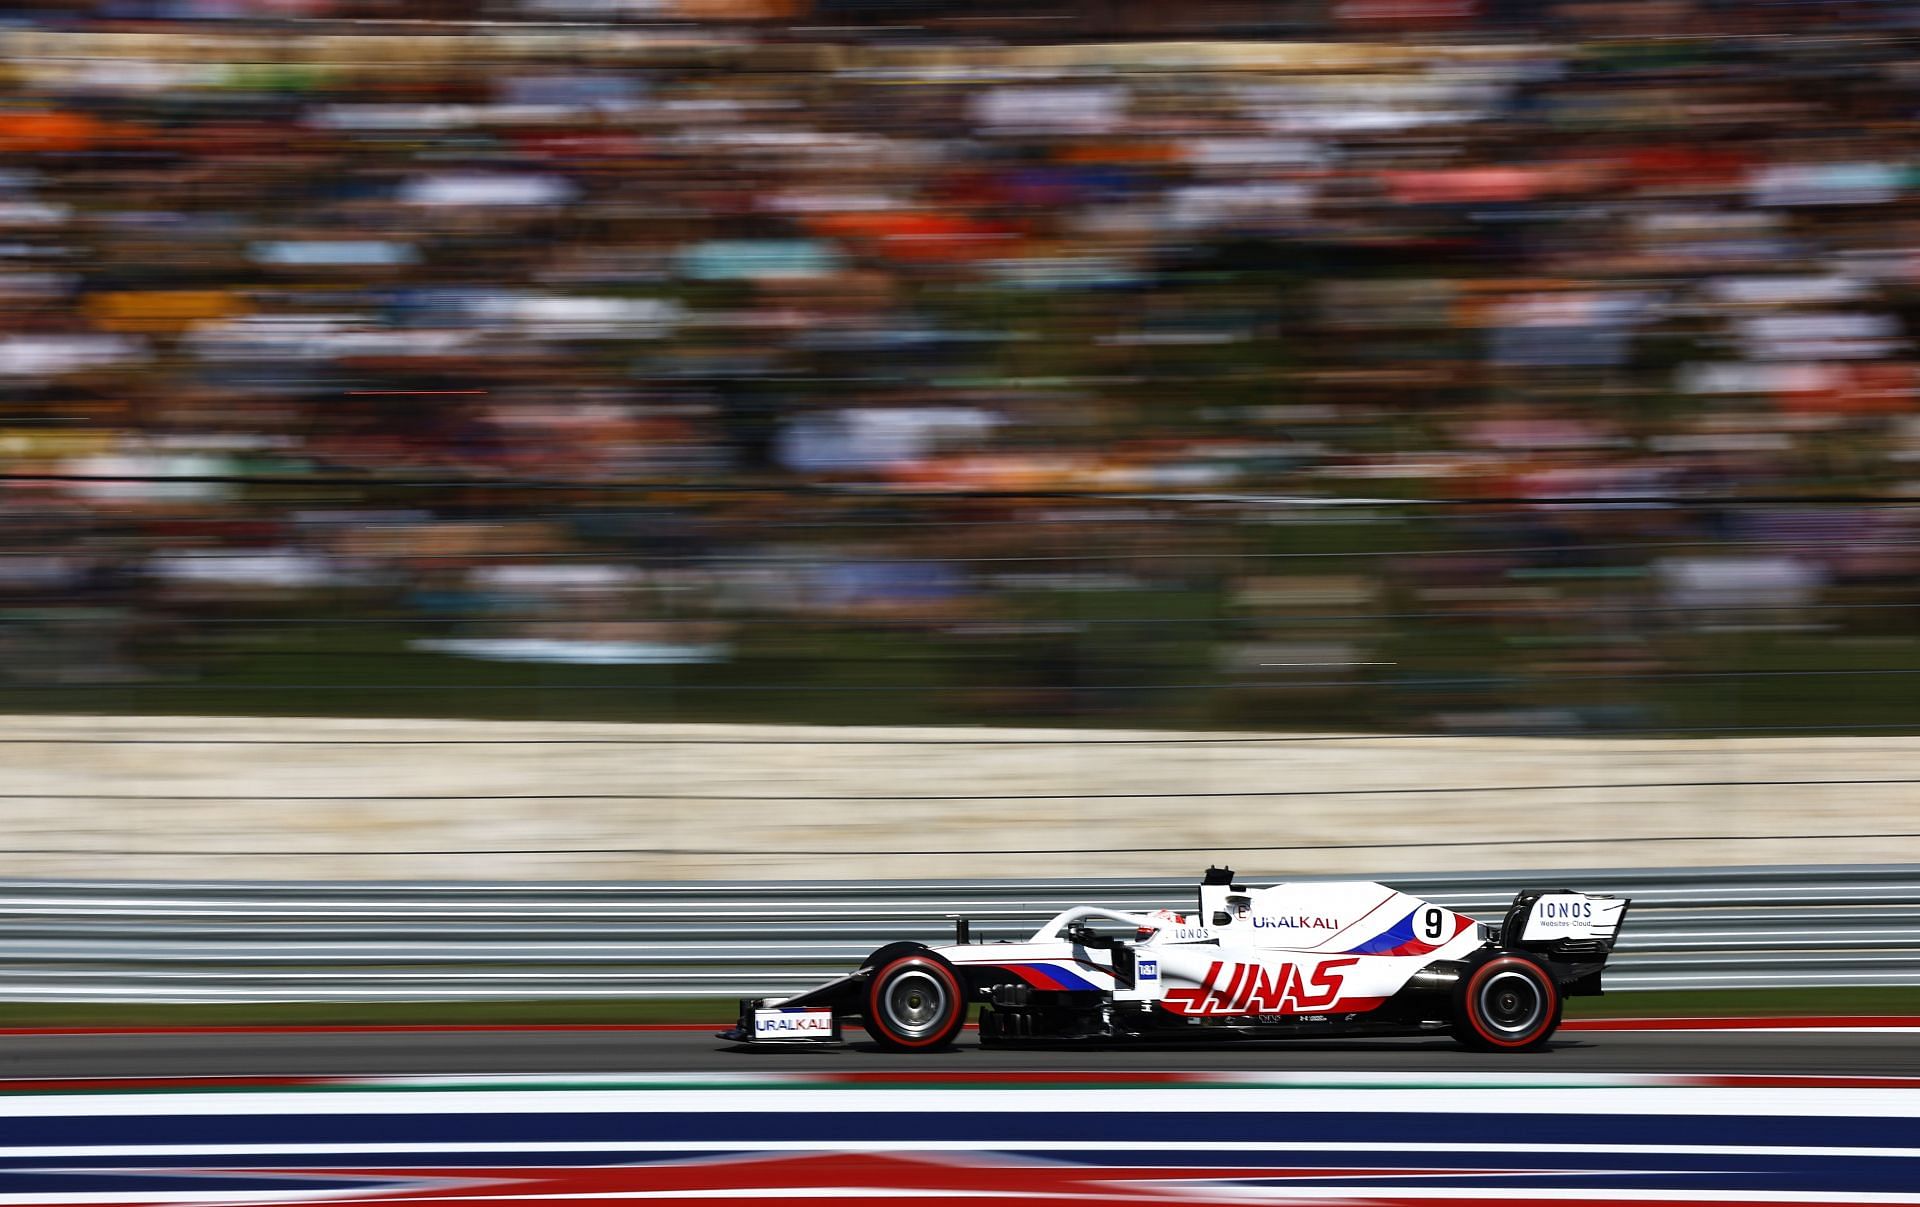 Nikita Mazepin driving the Haas F1 car. (Photo by Jared C. Tilton/Getty Images)